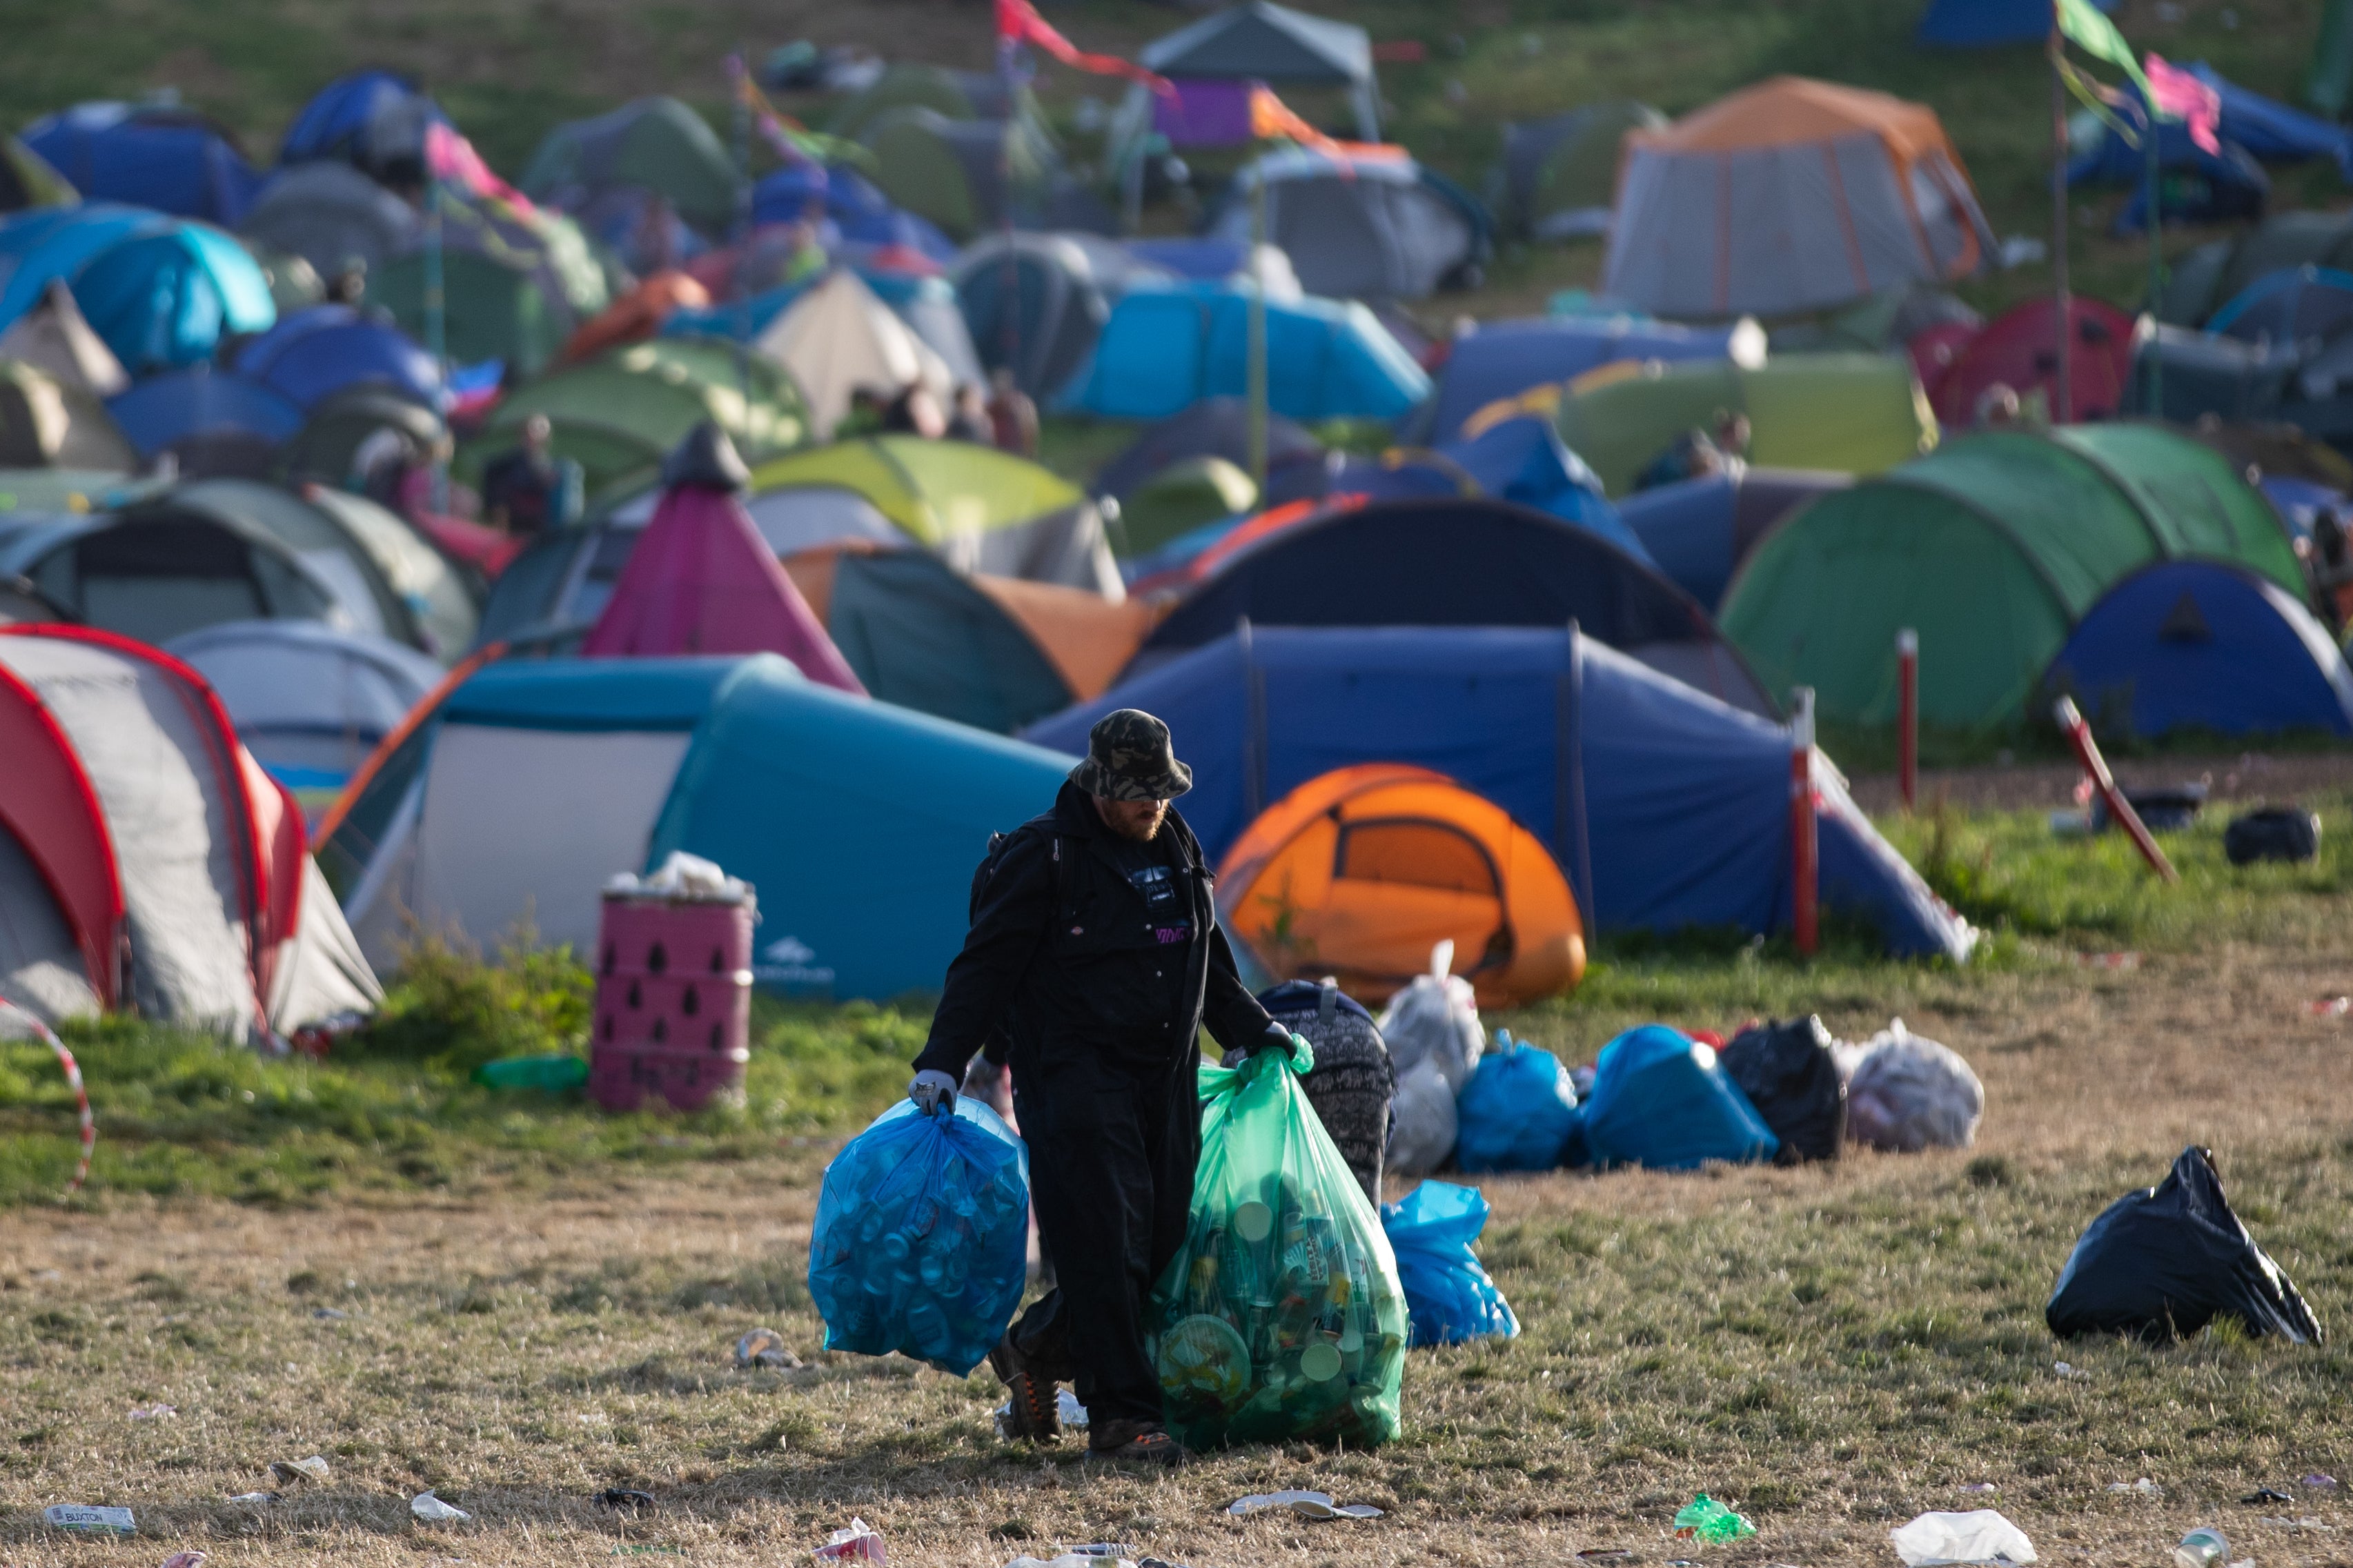 The clean up begins at Glastonbury festival in 2019